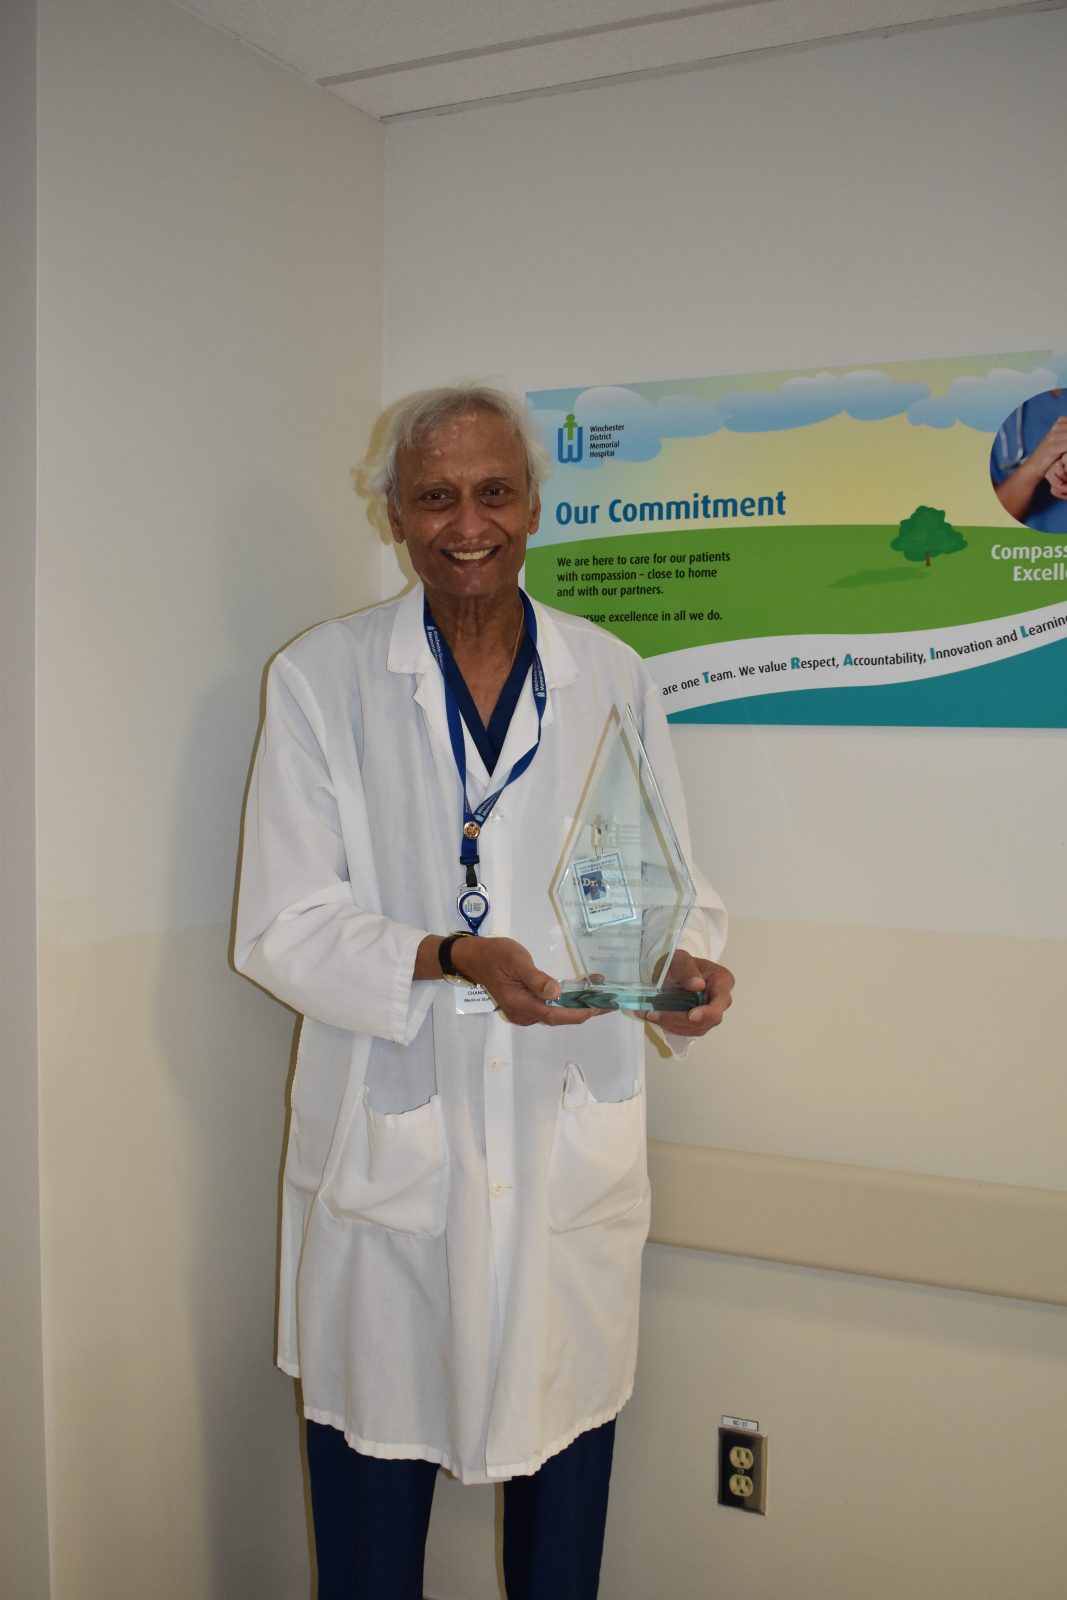 Dr. Suru Chande Retires After More Than 50 Years of Caring at WDMH